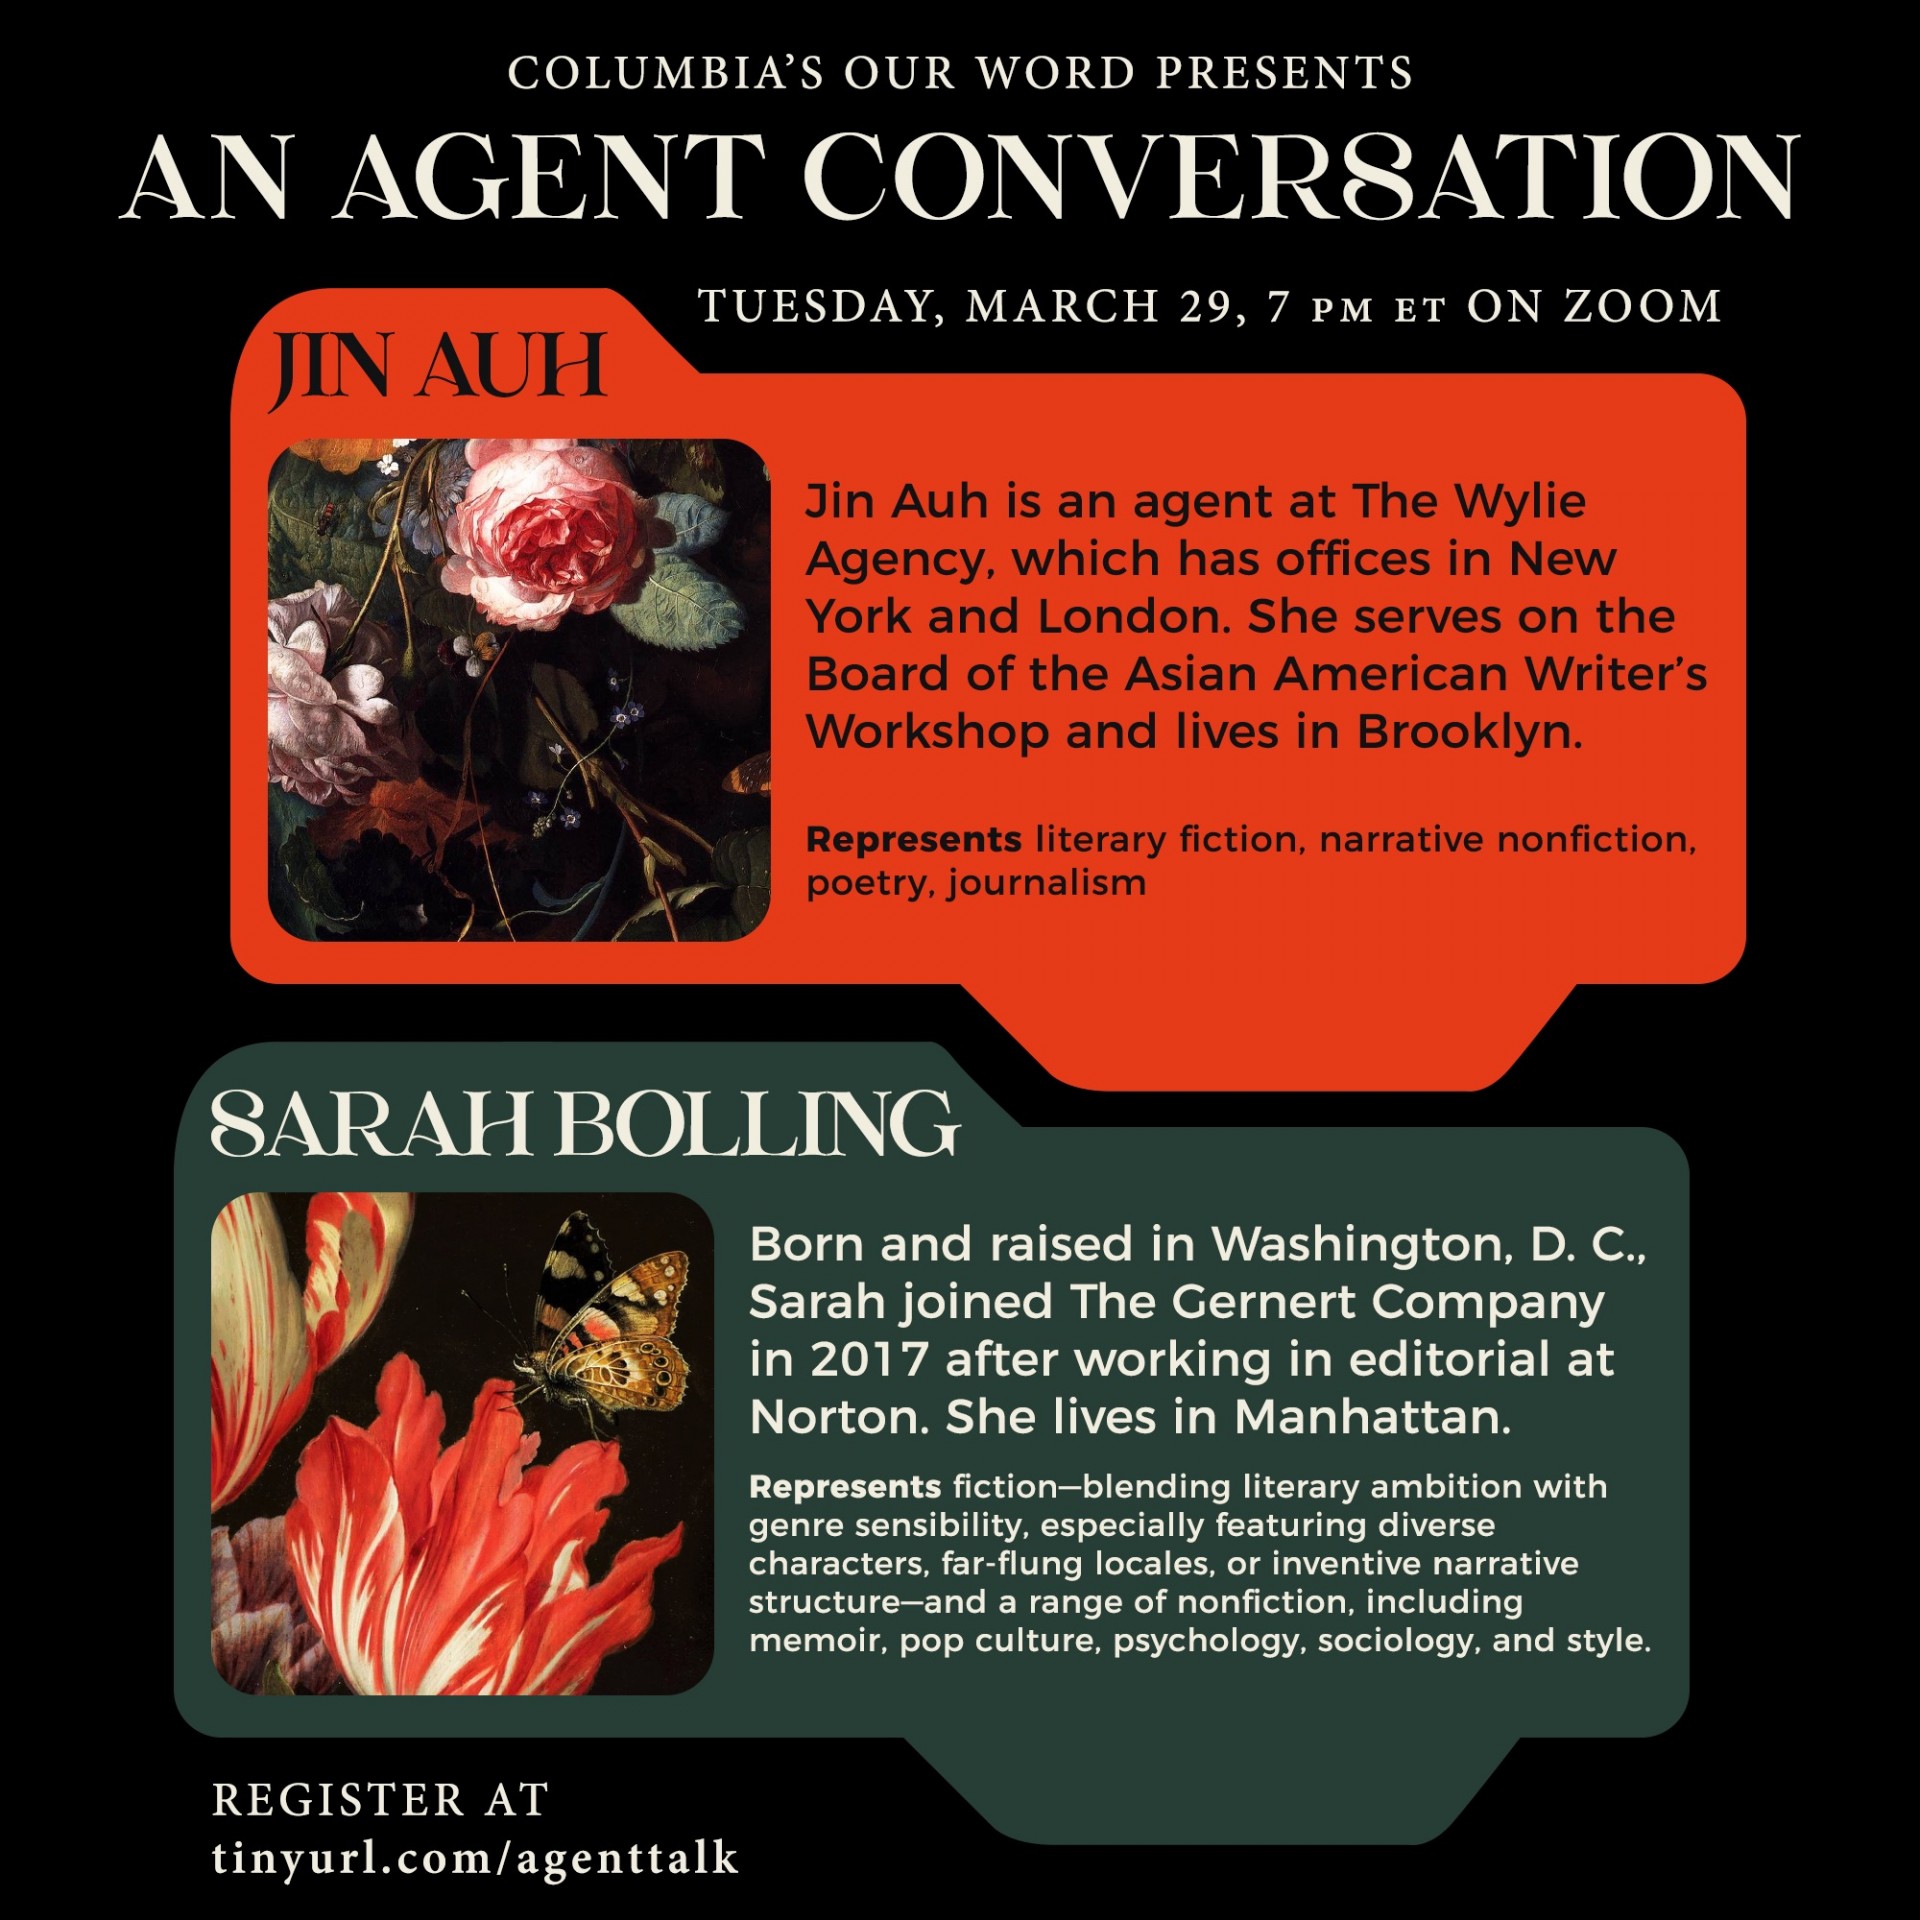 Spring 2022 Event: An Agent Conversation with Jin Auh and Sarah Bolling